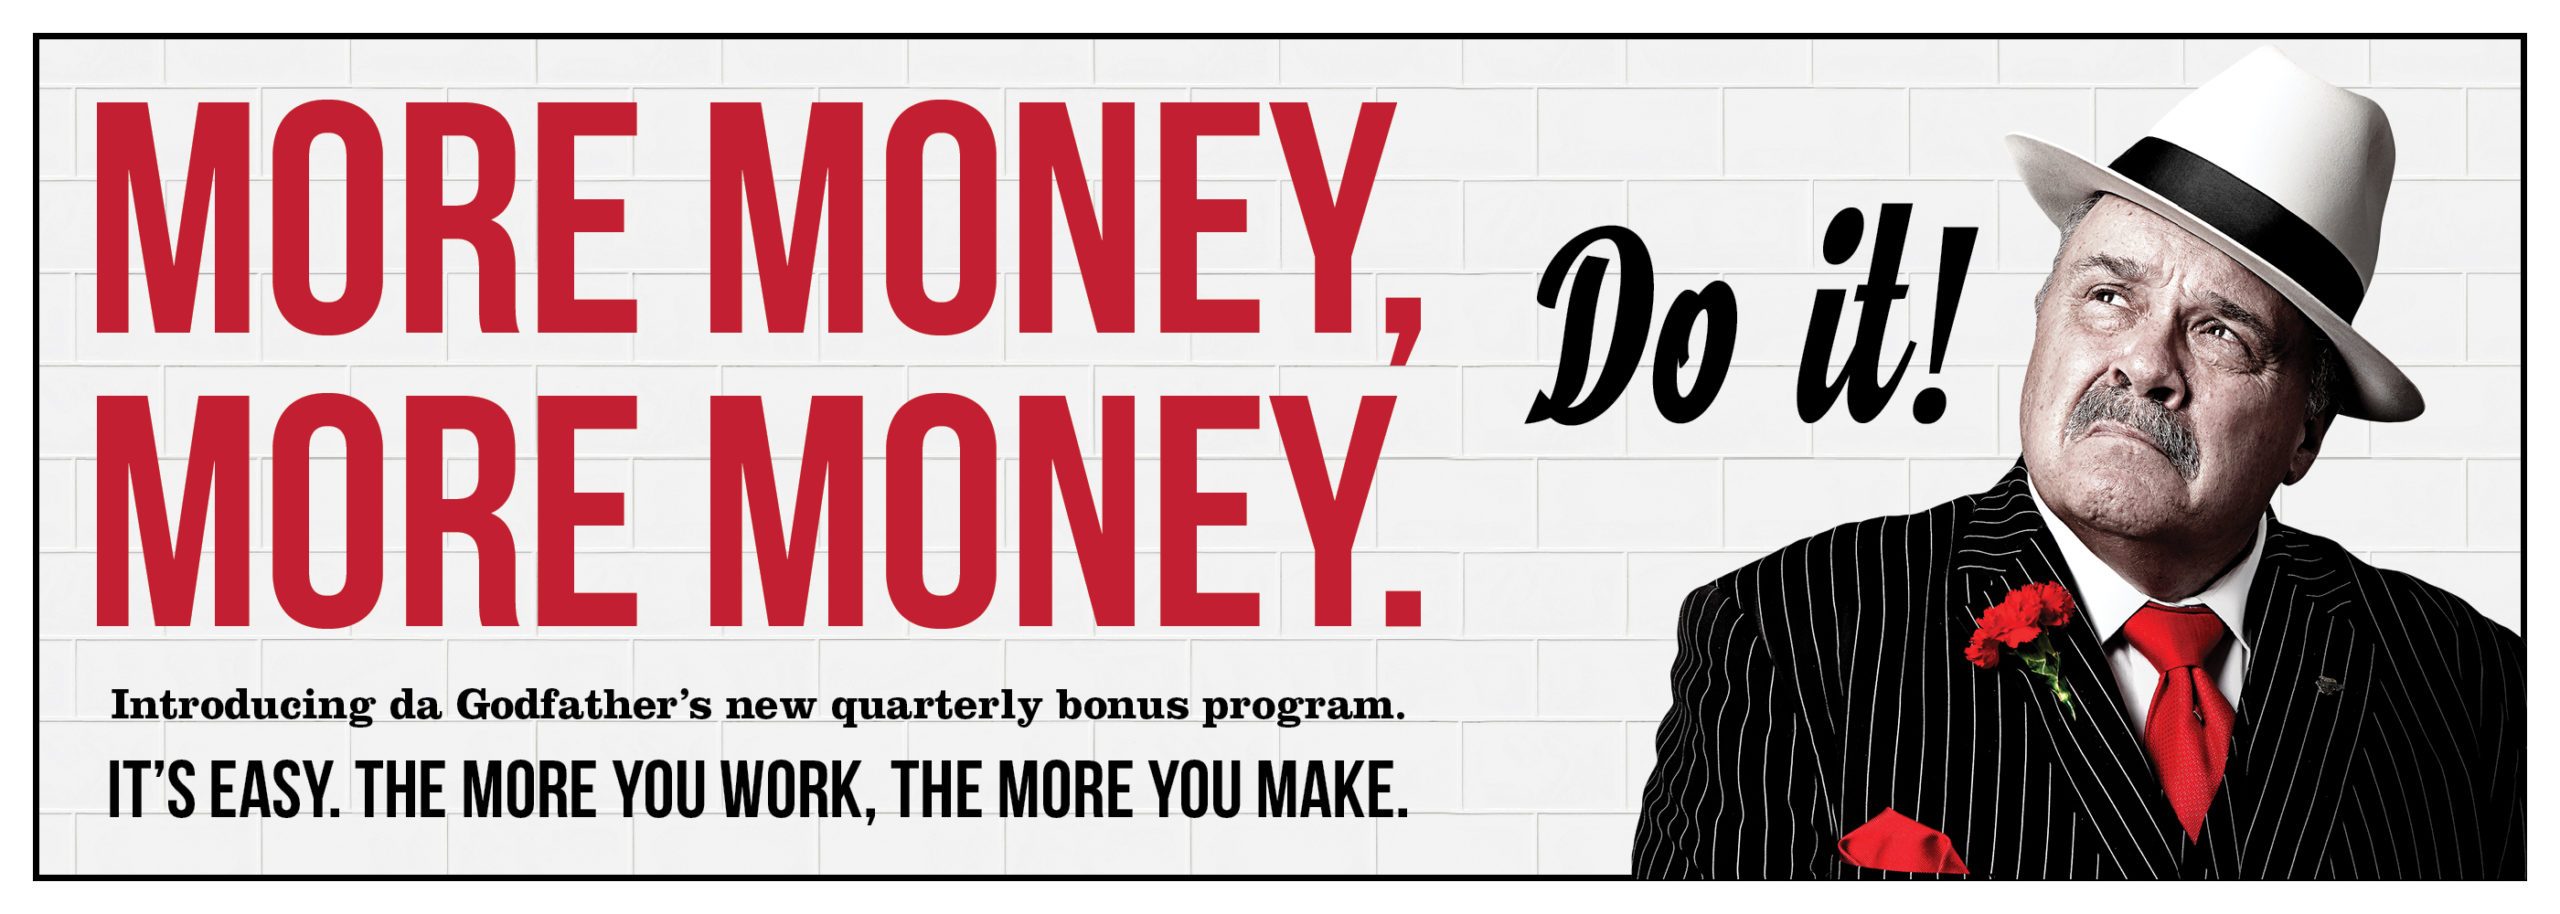 More Money. More Money. It’s easy. The more you work, the more you make.